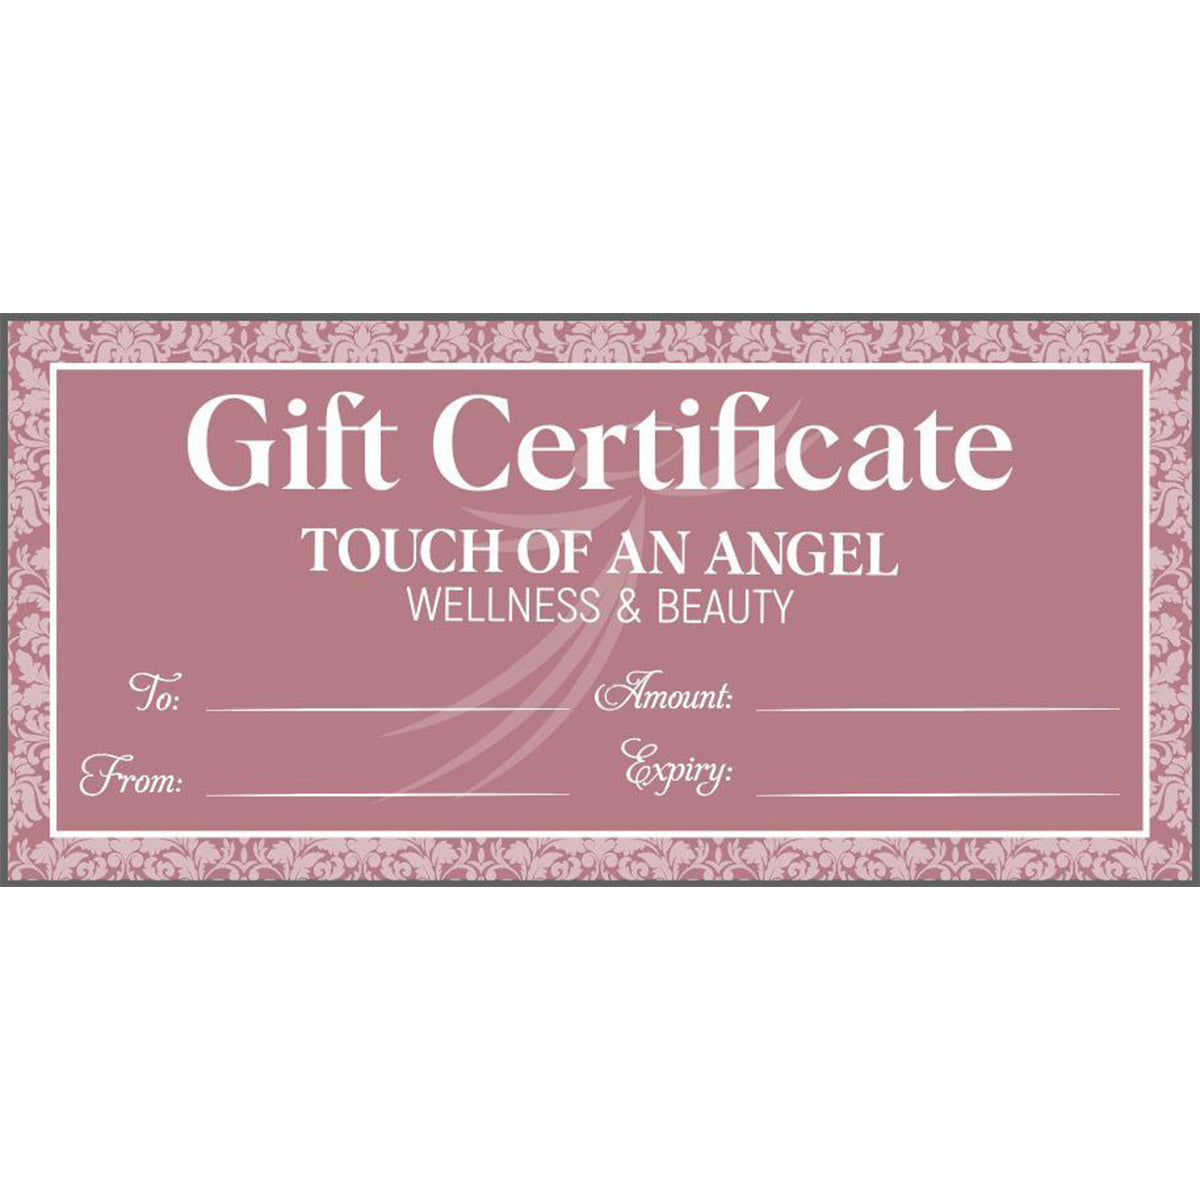 Gift Certificate - Gift Voucher - Touch of an Angel Wellness and Beauty